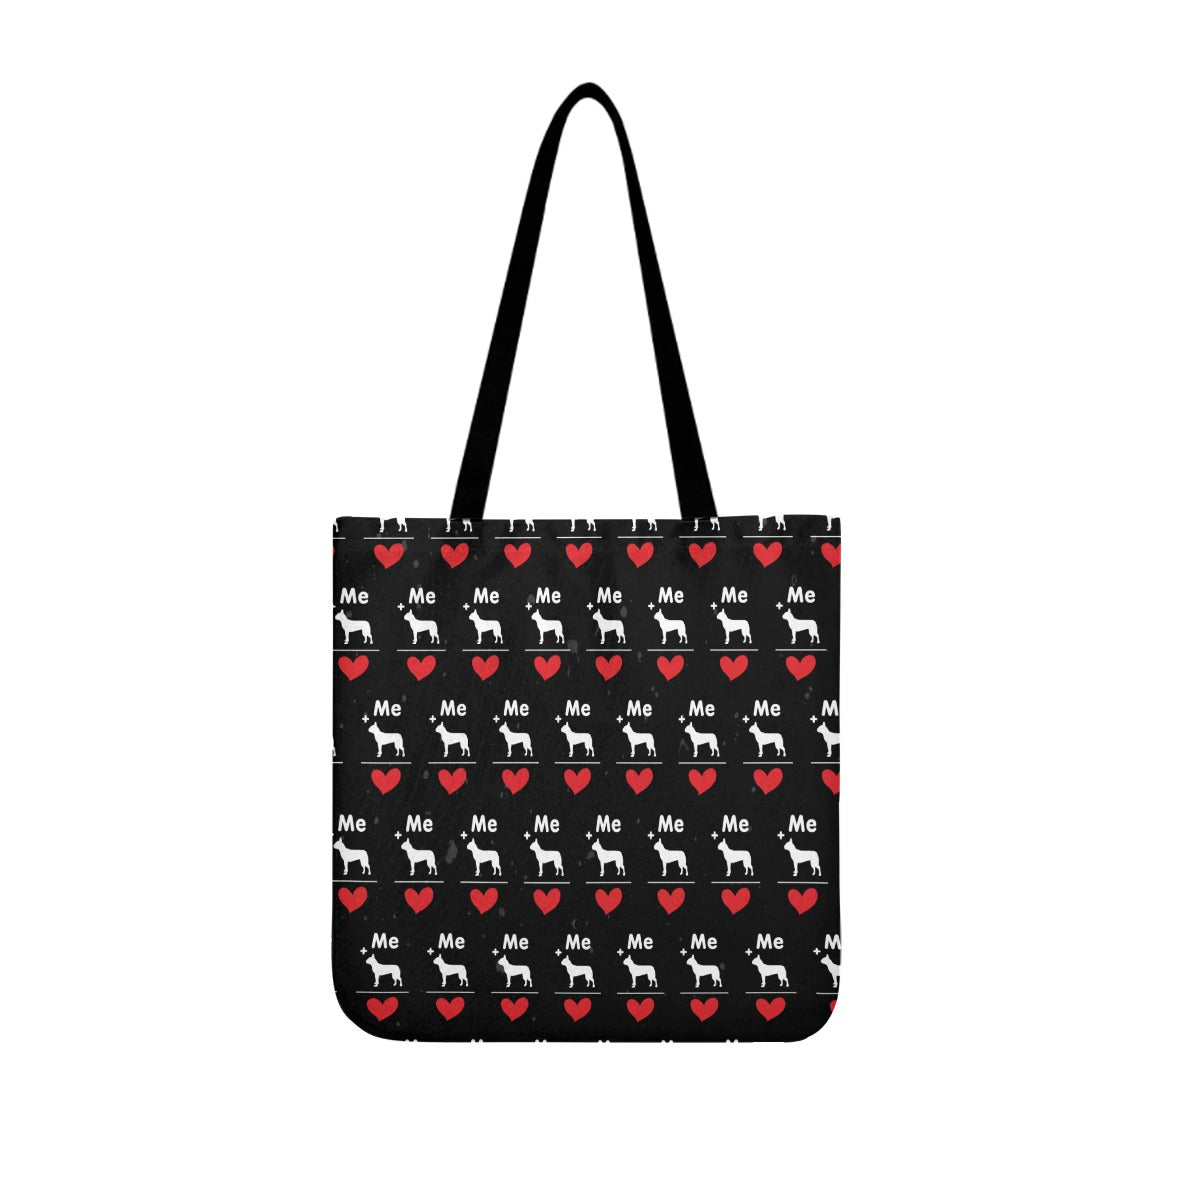 Chloe - Cloth Tote Bags for Boston Terrier lovers